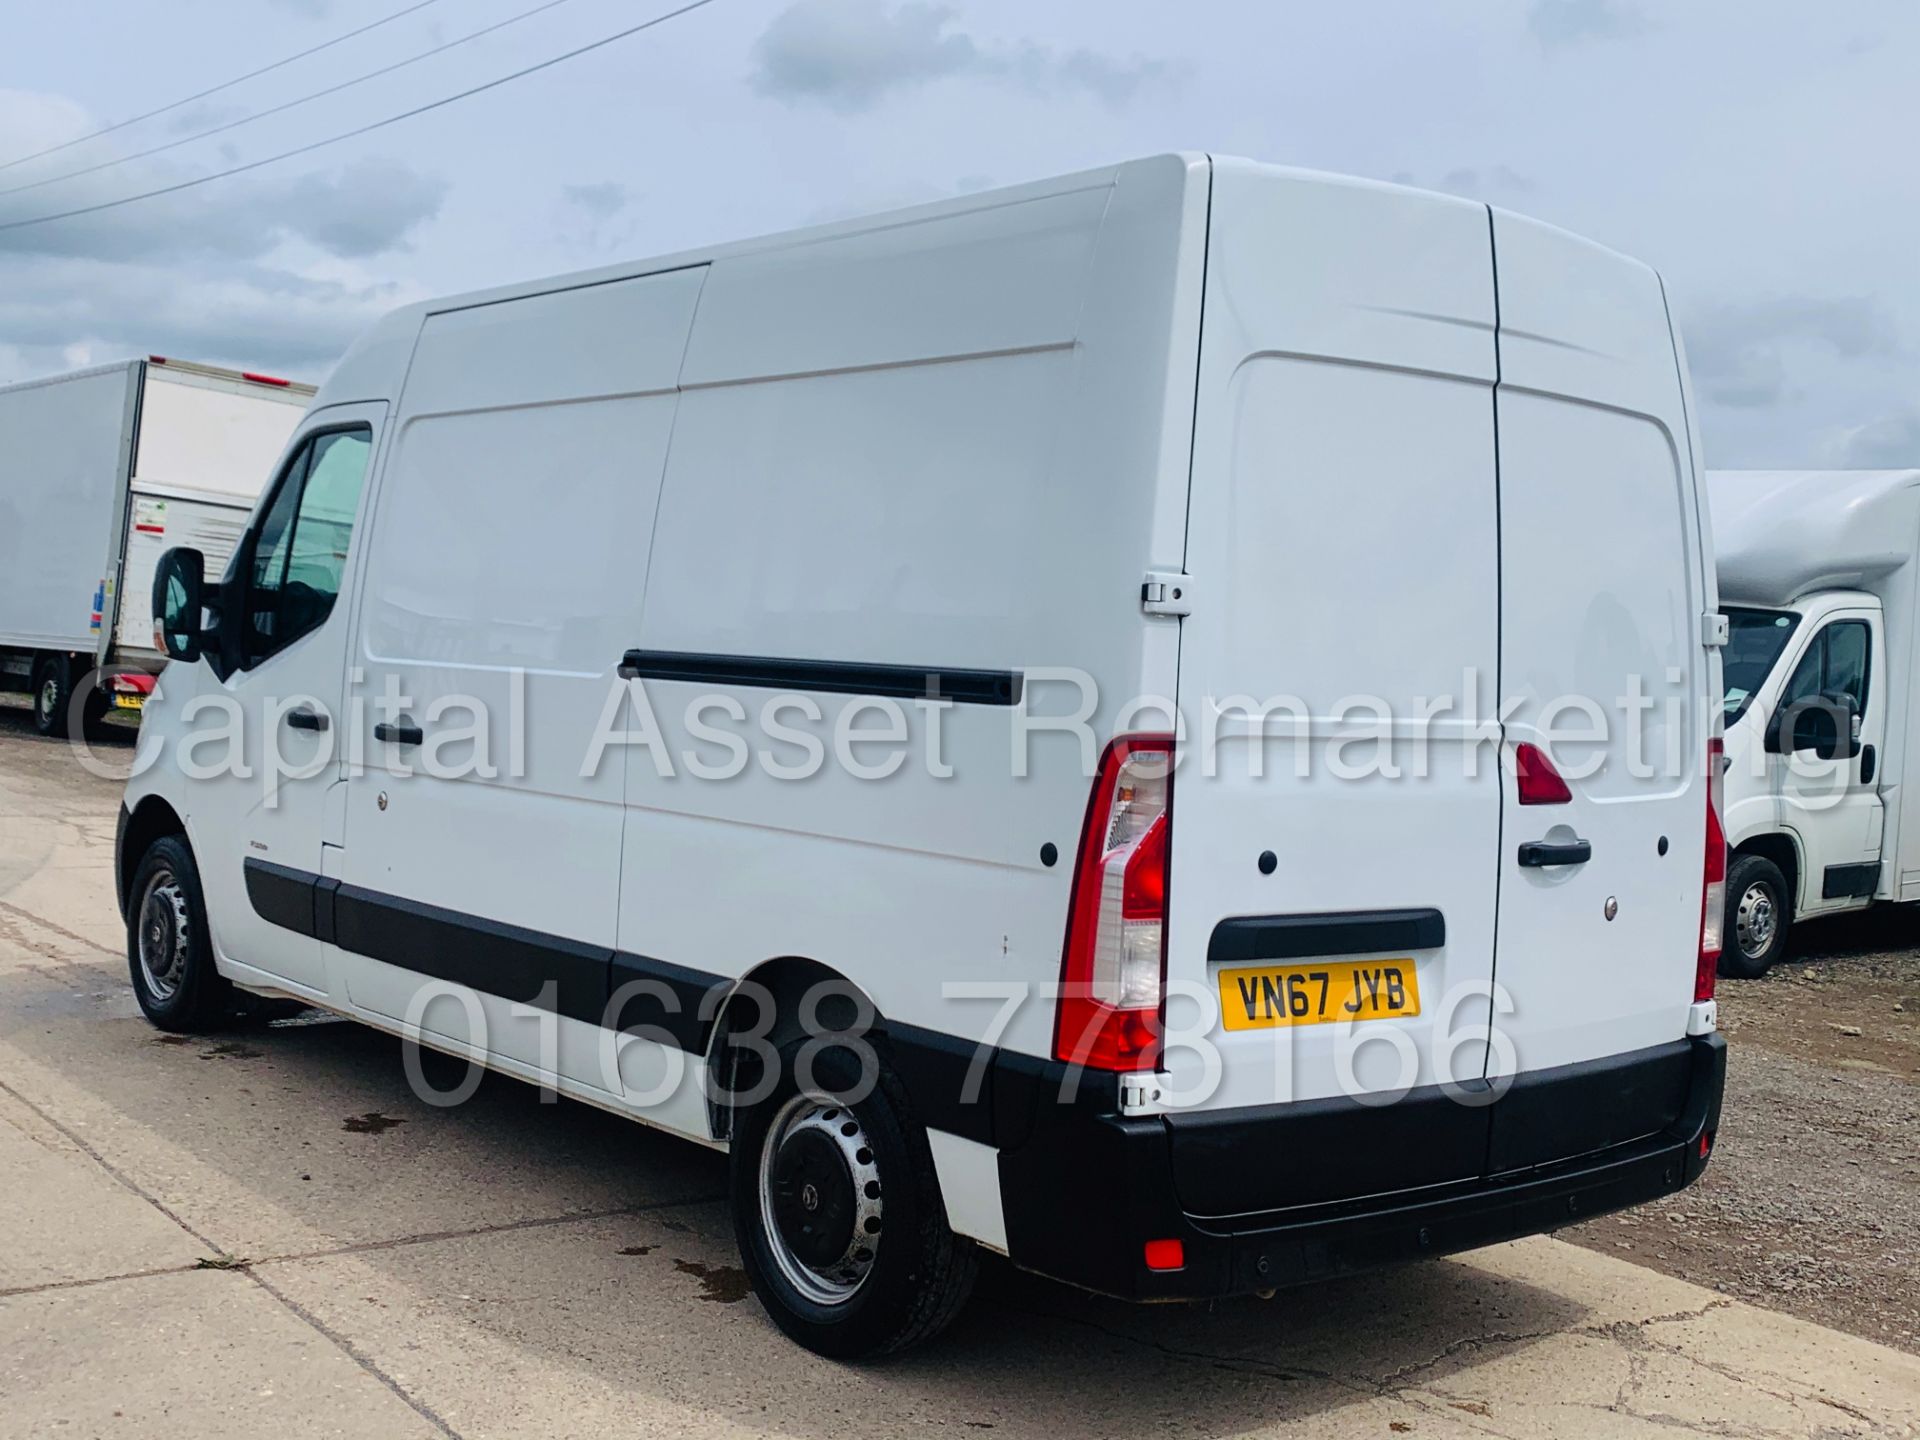 (ON SALE) VAUXHALL MOVANO *MWB HI-ROOF* (2018 - EURO 6) '2.3 CDTI - 130 BHP - 6 SPEED' (1 OWNER) - Image 10 of 39